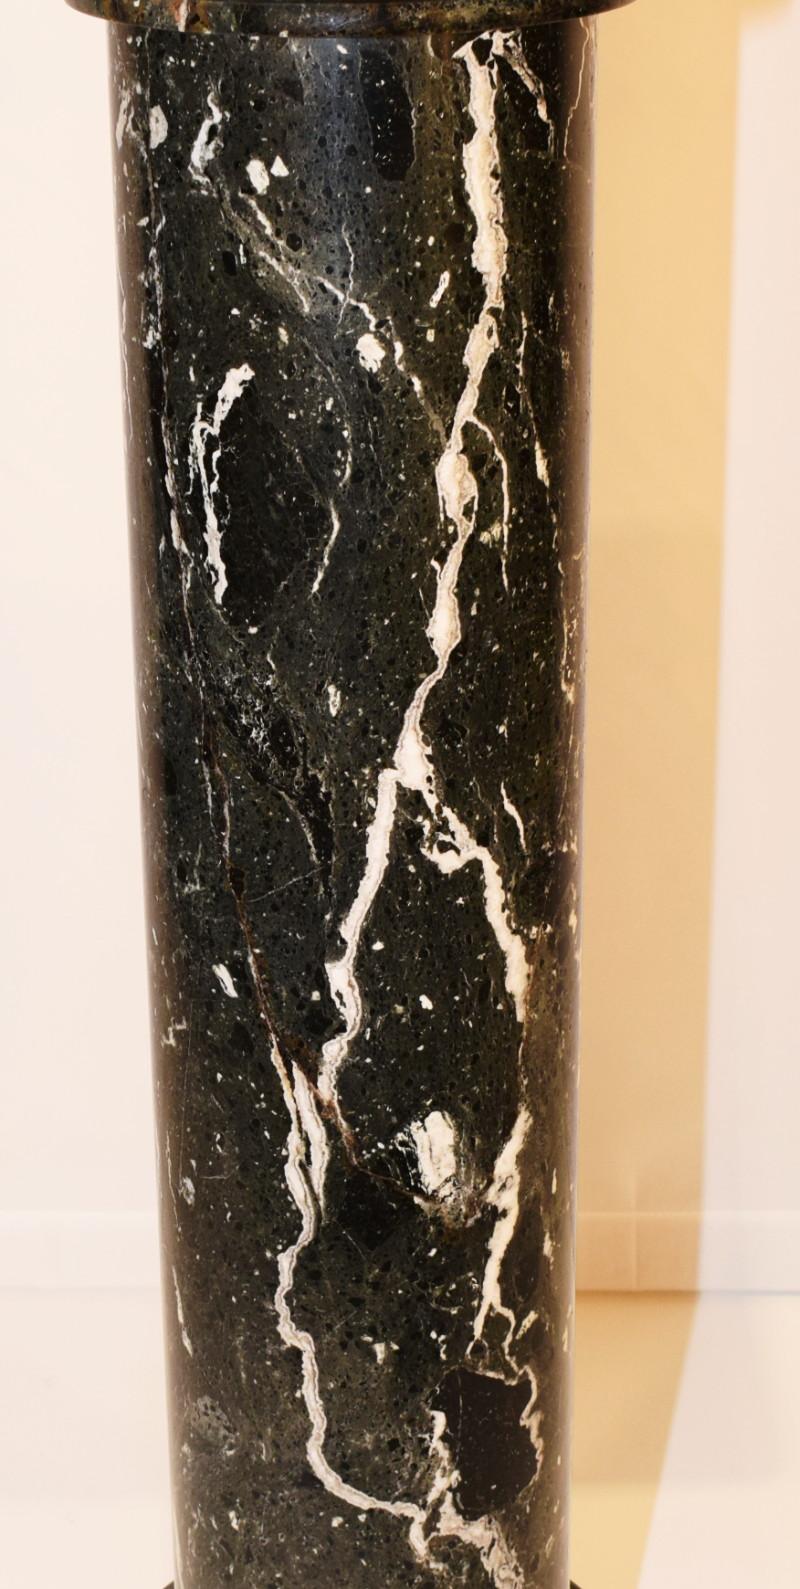 A black and white variegated marble pedestal.
20th century. Measure: Height 43 inches.